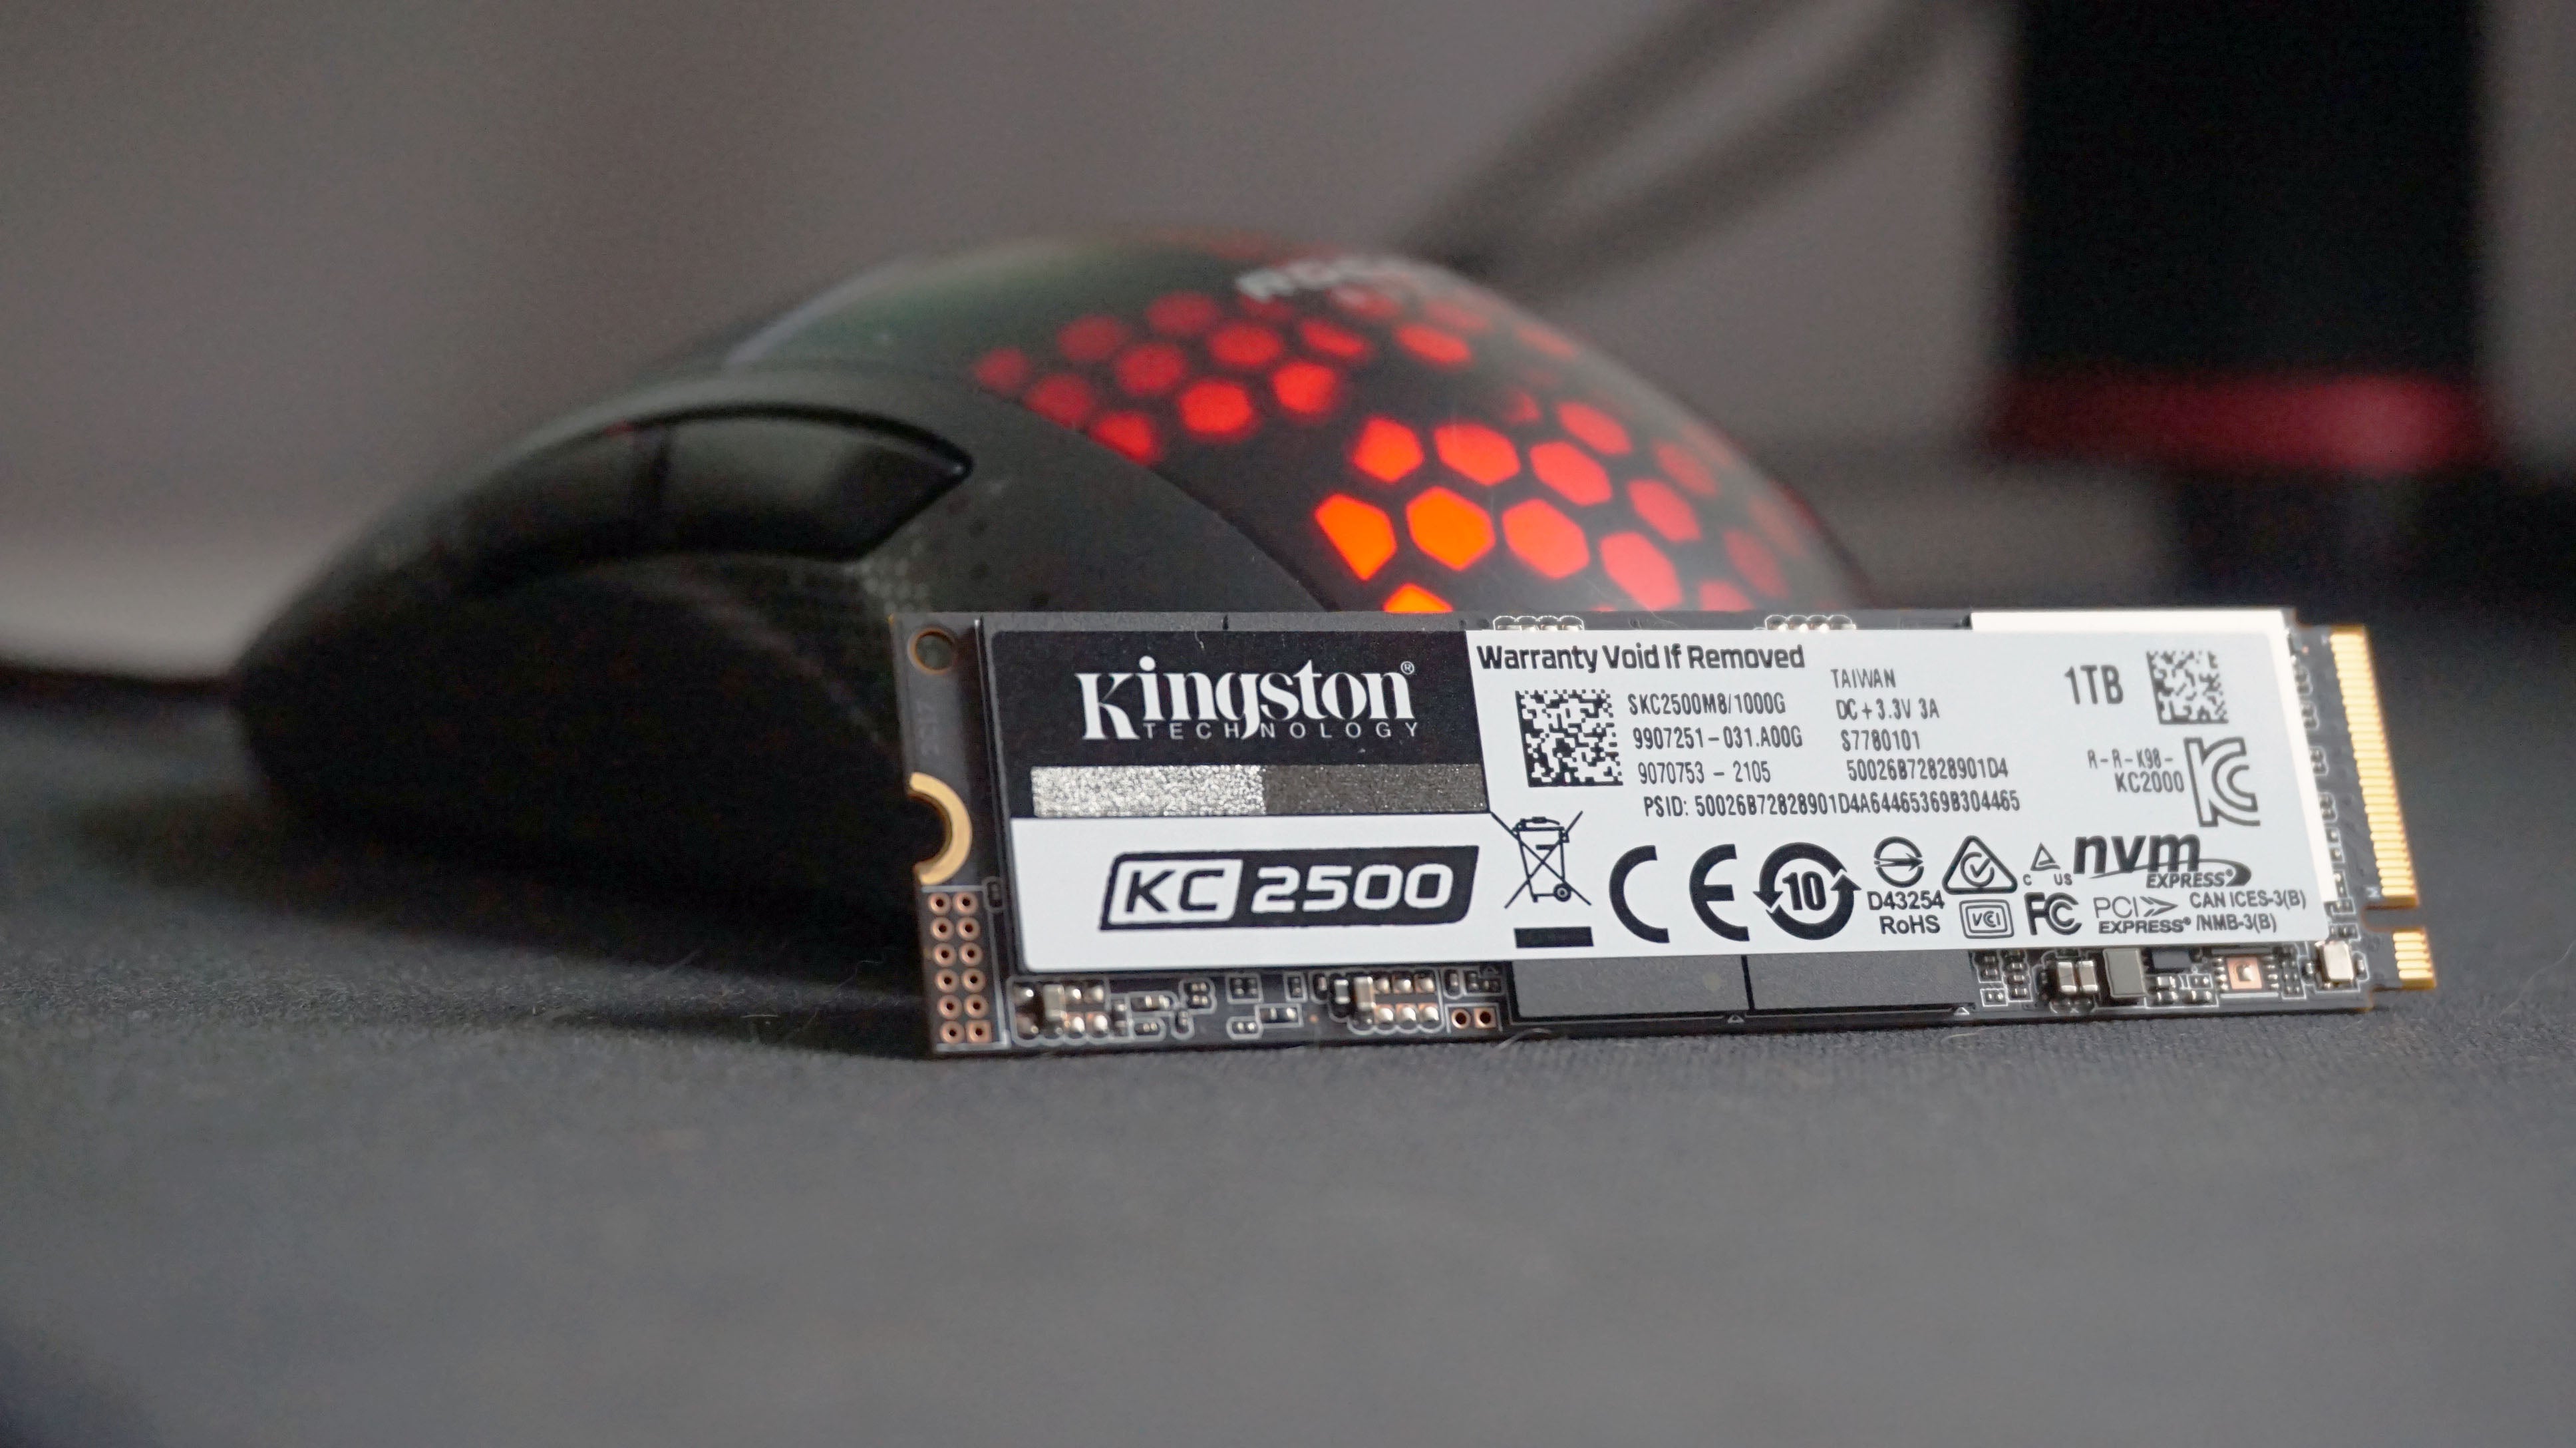 A photo of the Kingston KC2500 SSD in front of an RGB gaming mouse